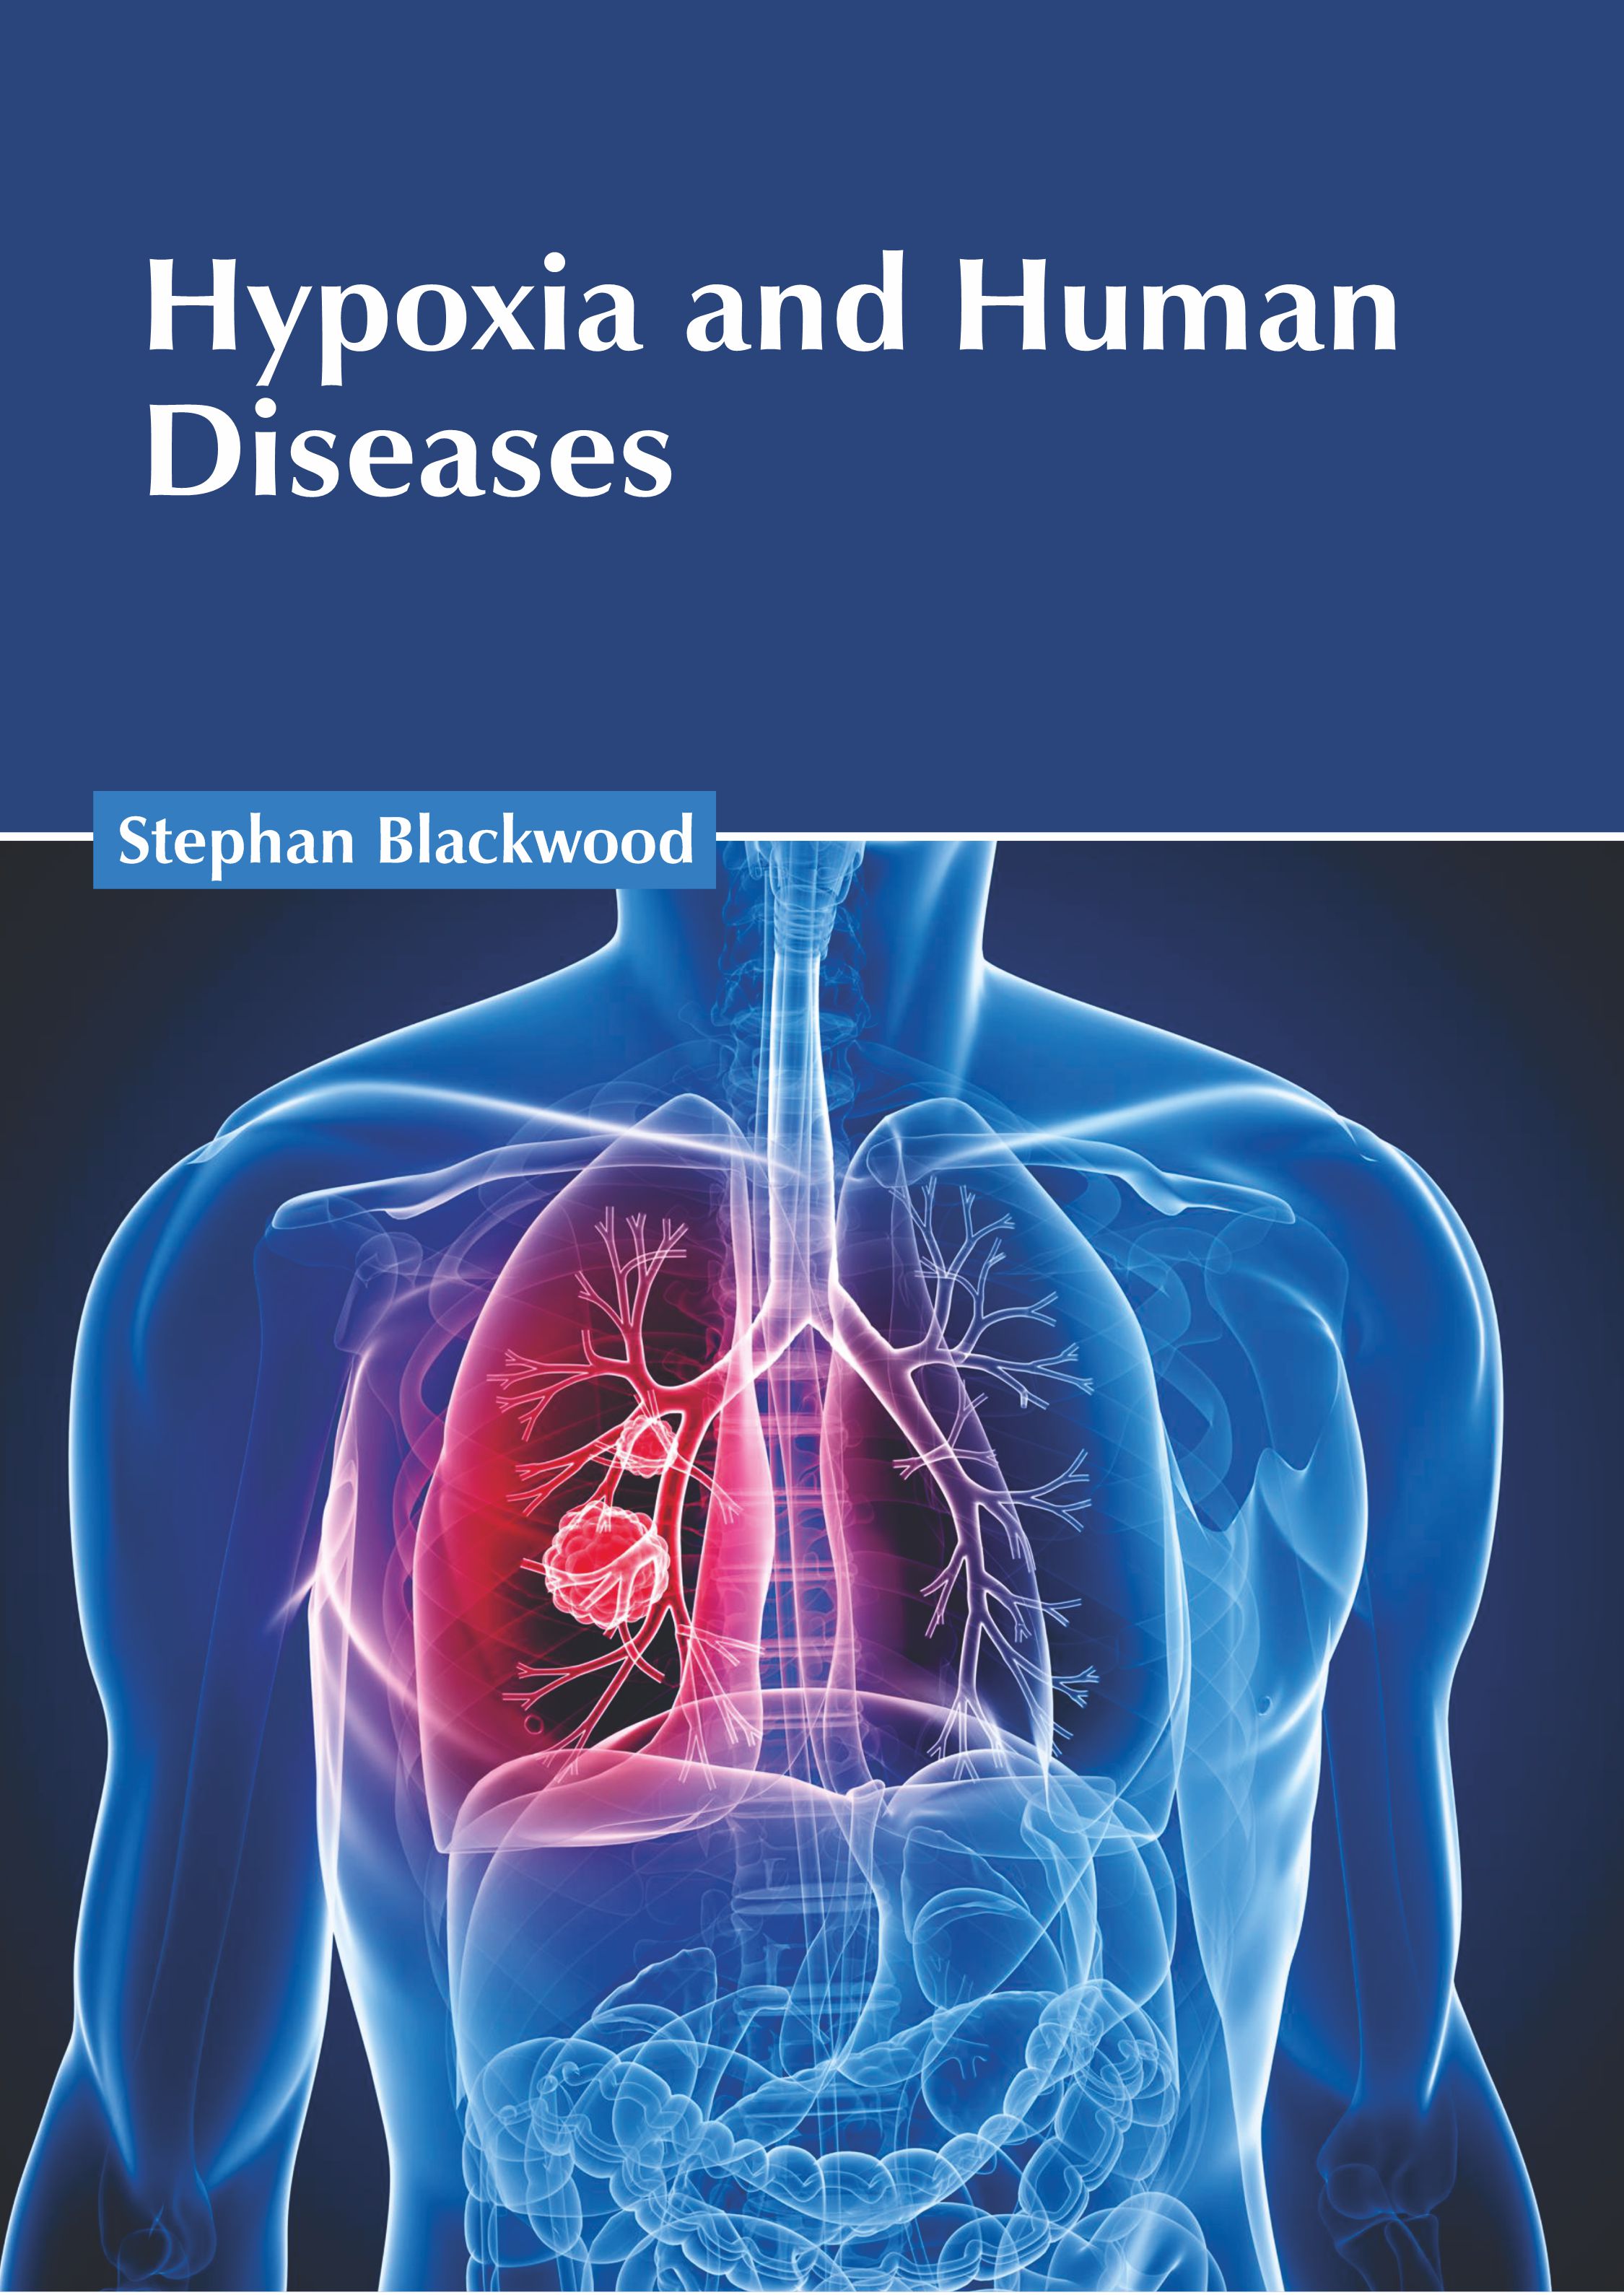 HYPOXIA AND HUMAN DISEASES